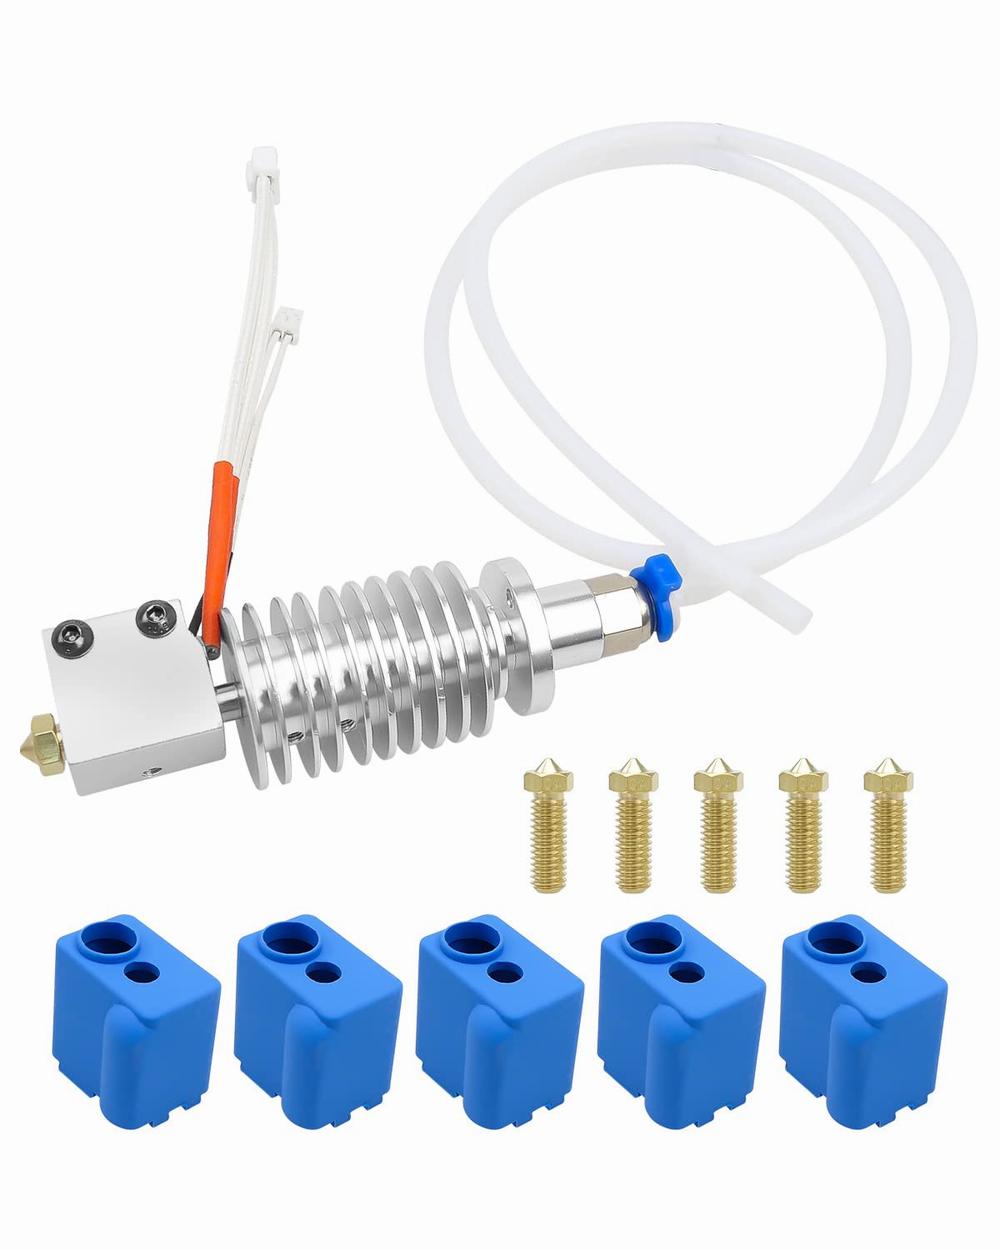 The image shows a metal extruder with a blue silicone cover and a white Bowden tube.